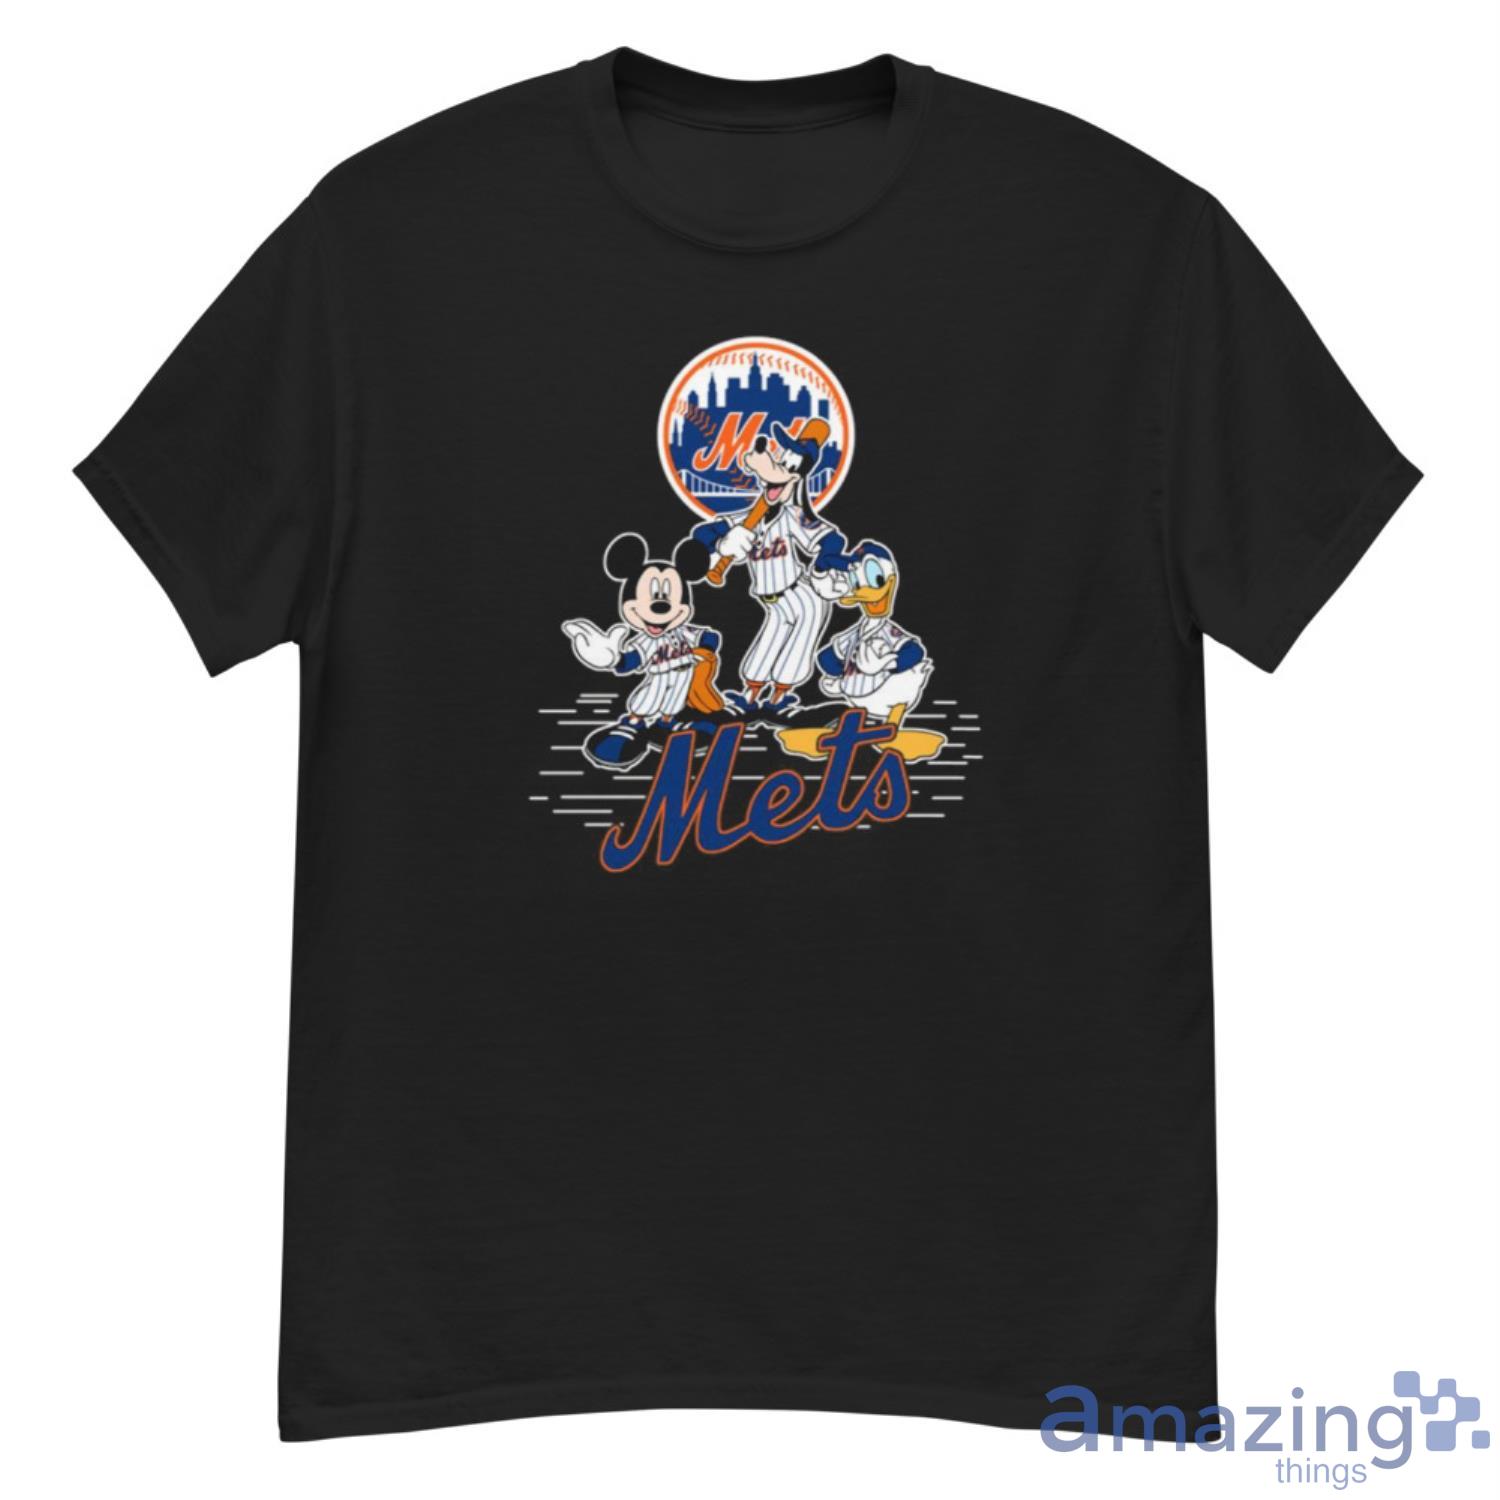 Get the NY Mets x Mickey Baseball Jersey Now!